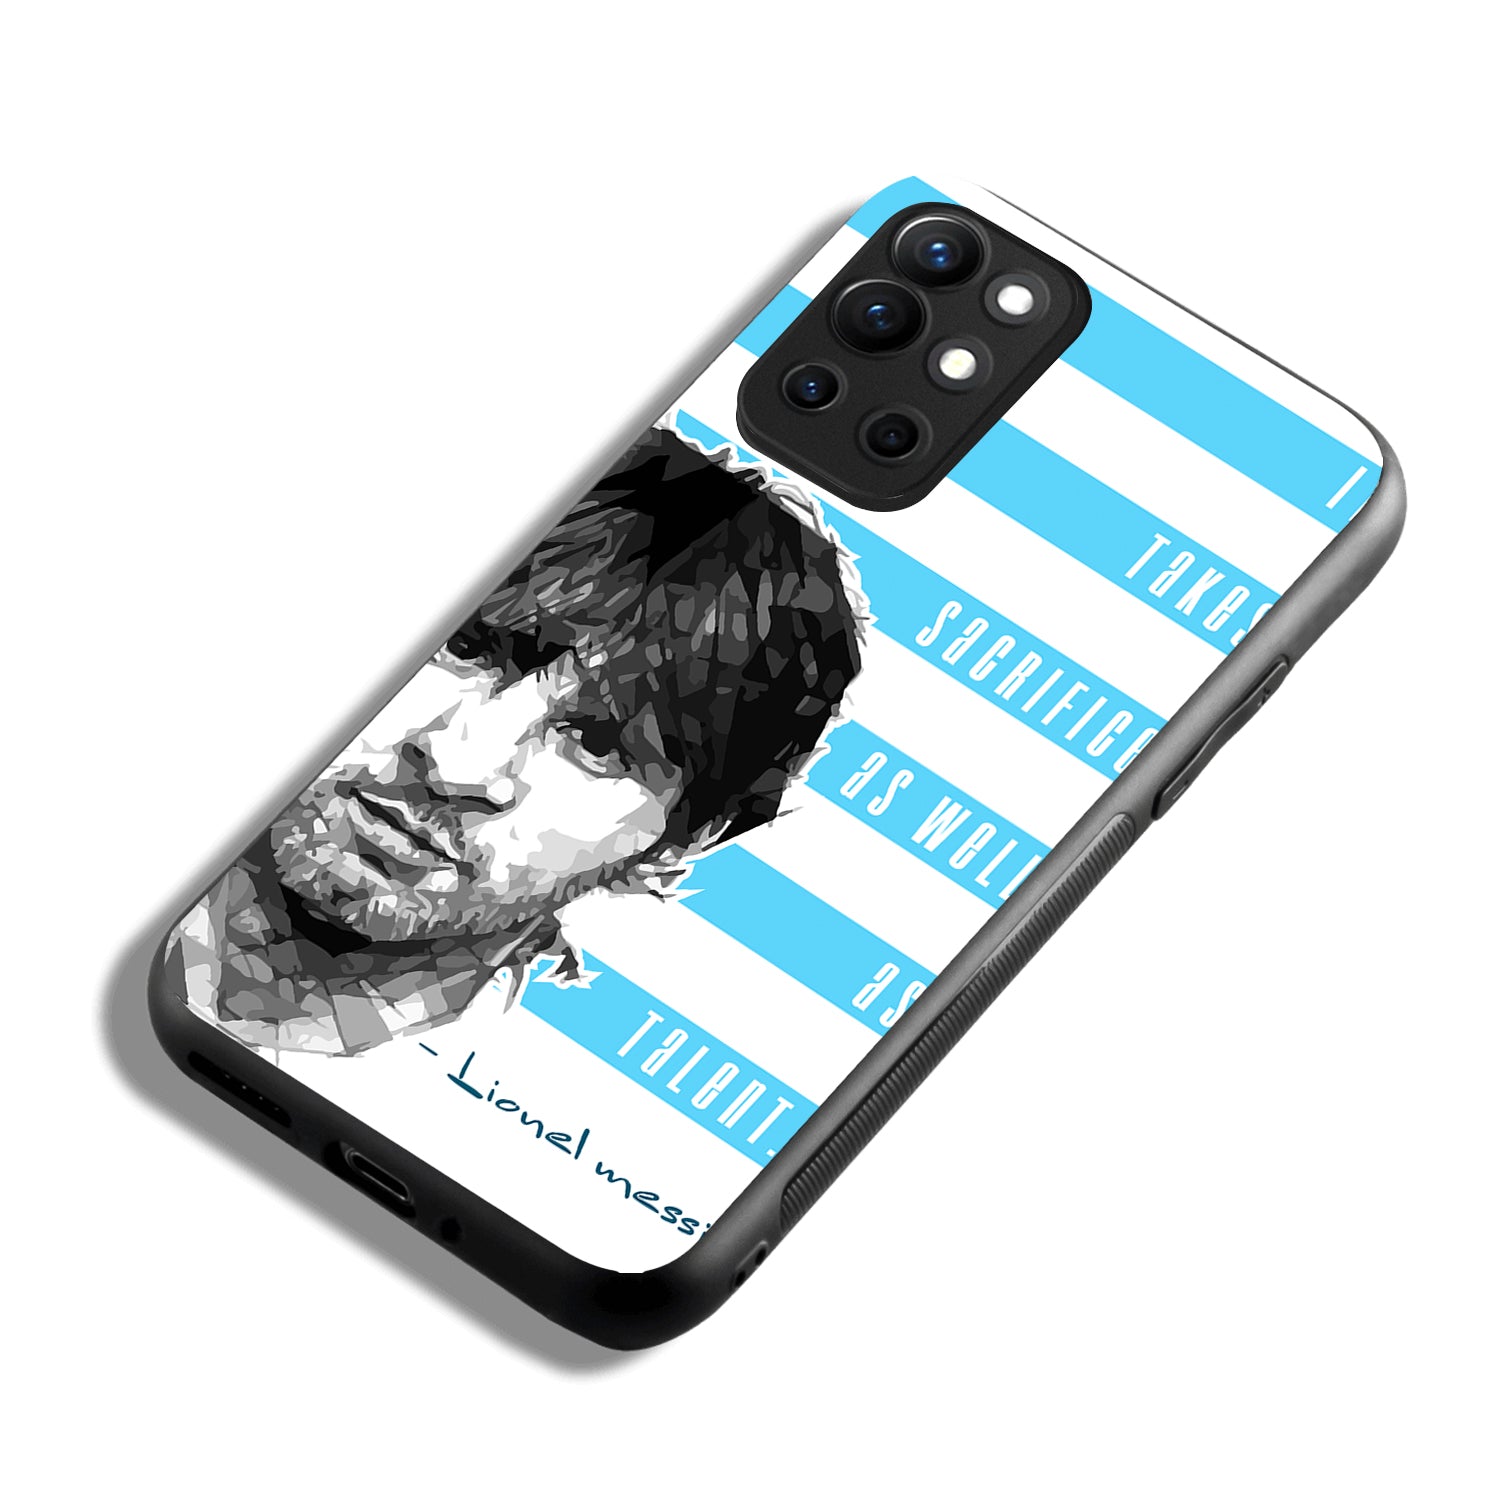 Messi Quote Sports Oneplus 9 pro Back Case